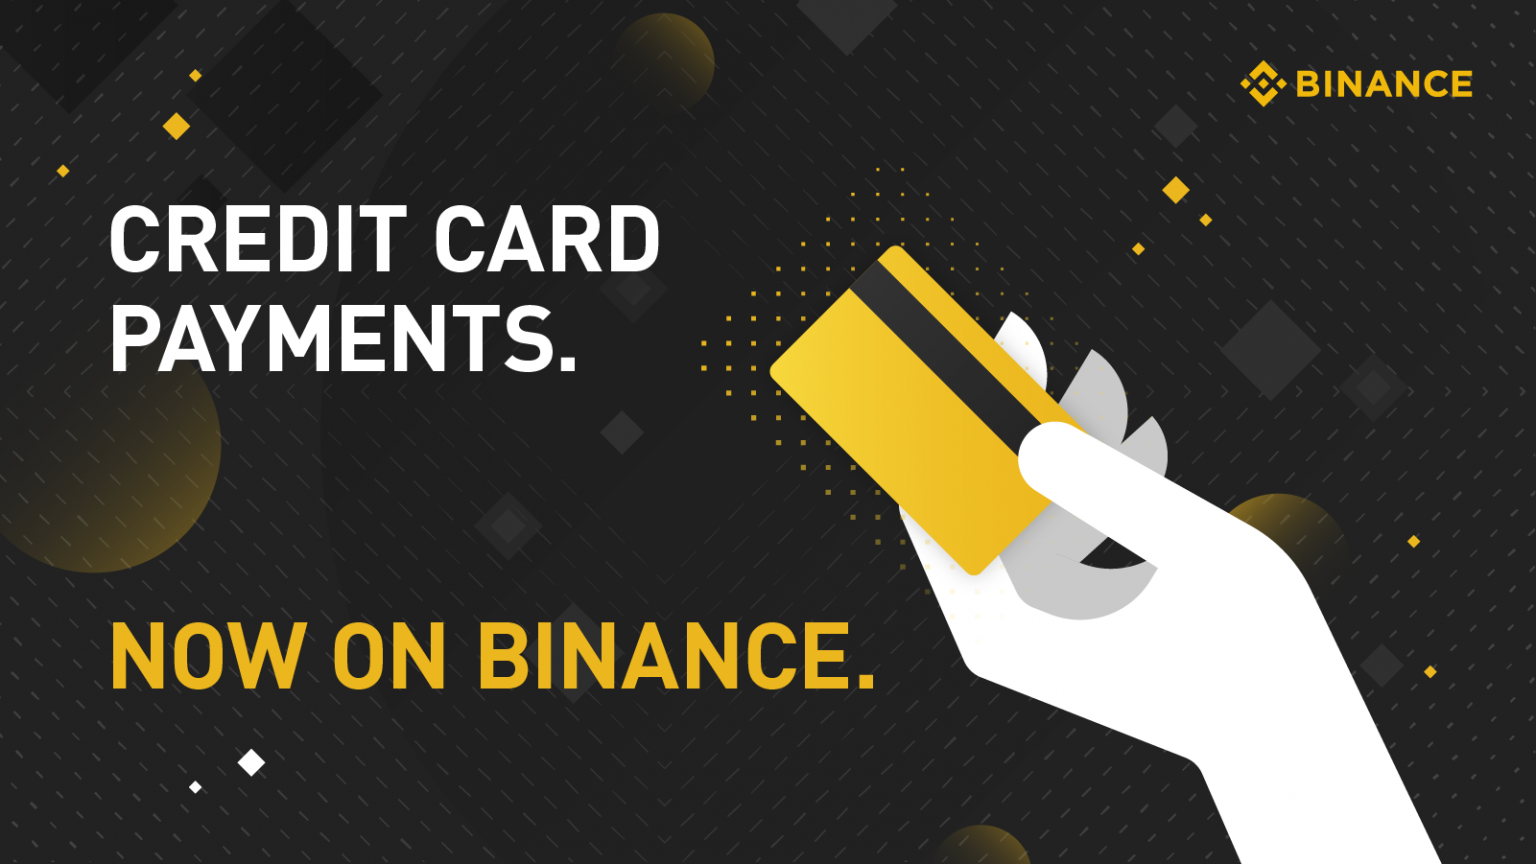 Binance Review – A Crypto Broker You Can Trust? | Trade Wise